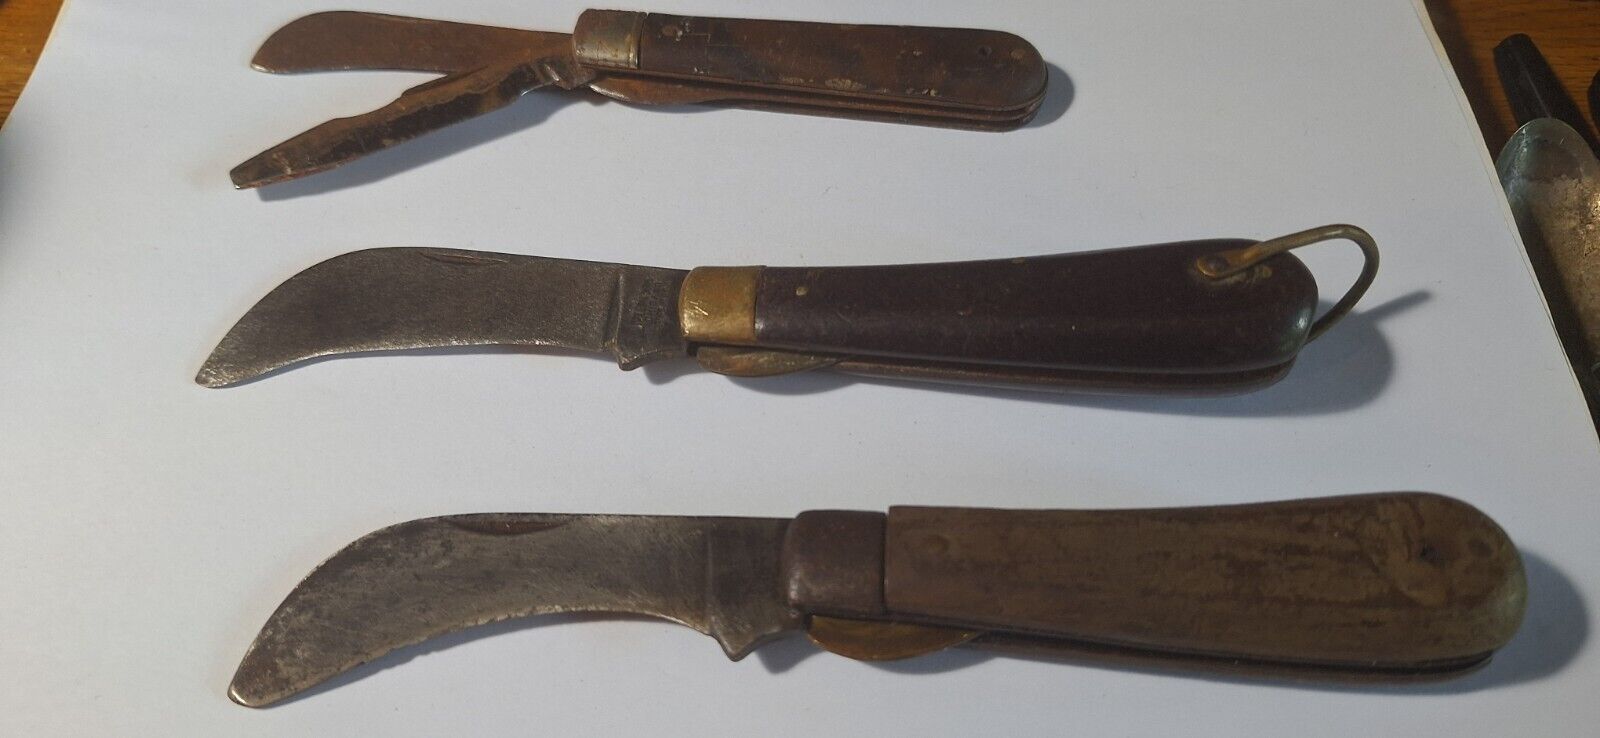 Lot 3 vintage pruning knives - M Klein & Sons, Colonial - For parts, repair